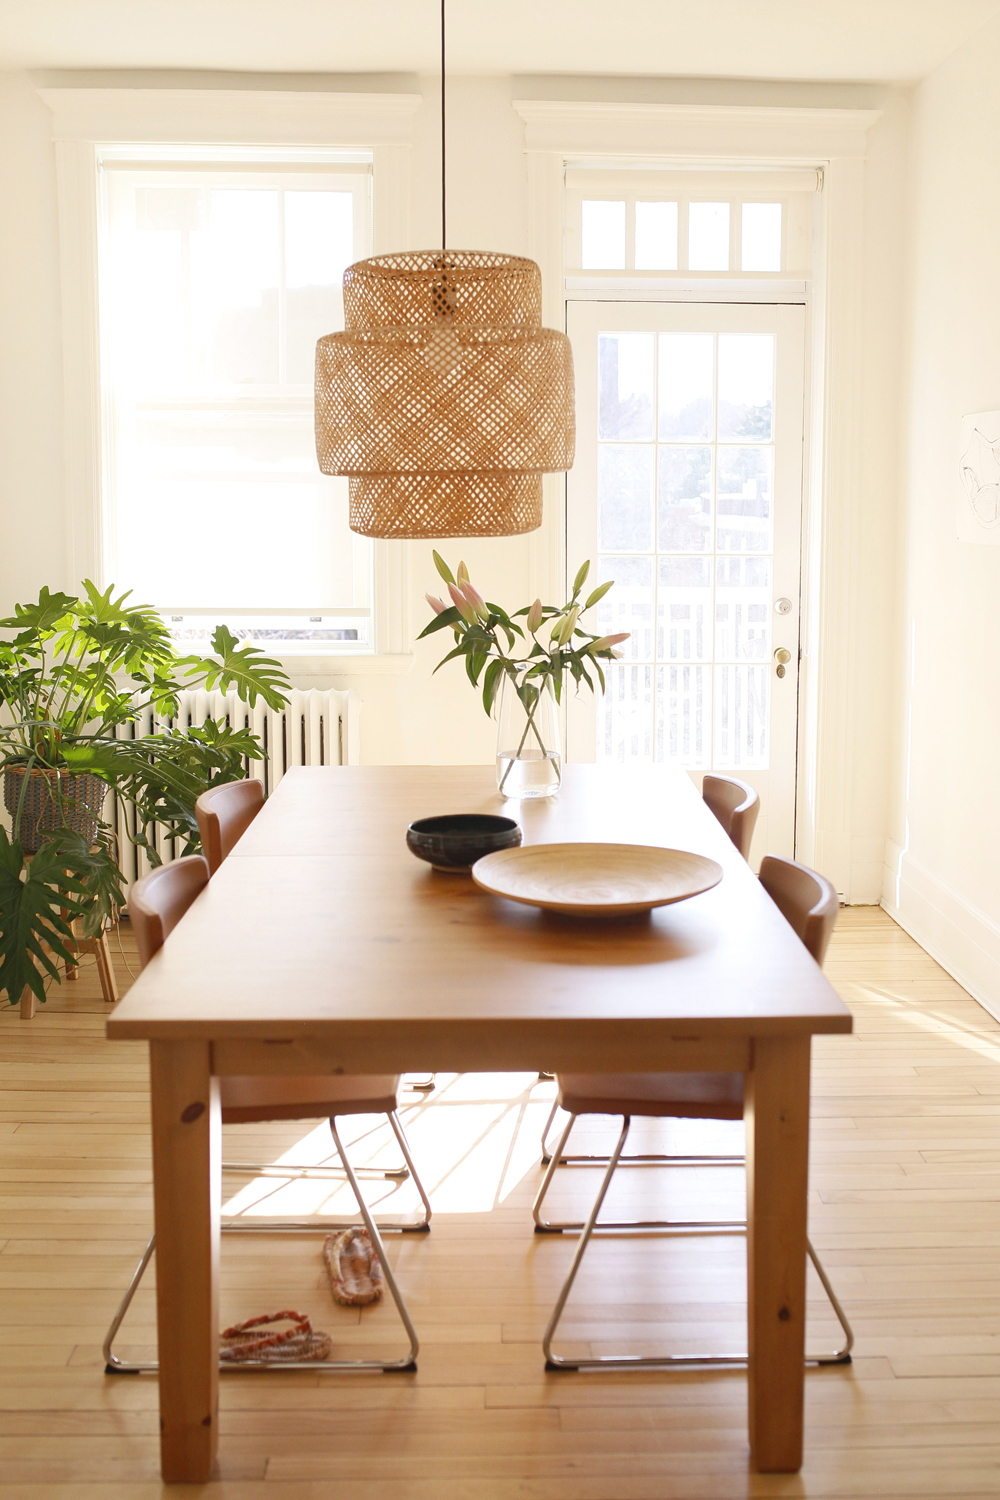 wood kitchen table, four chairs, wicket pendant light